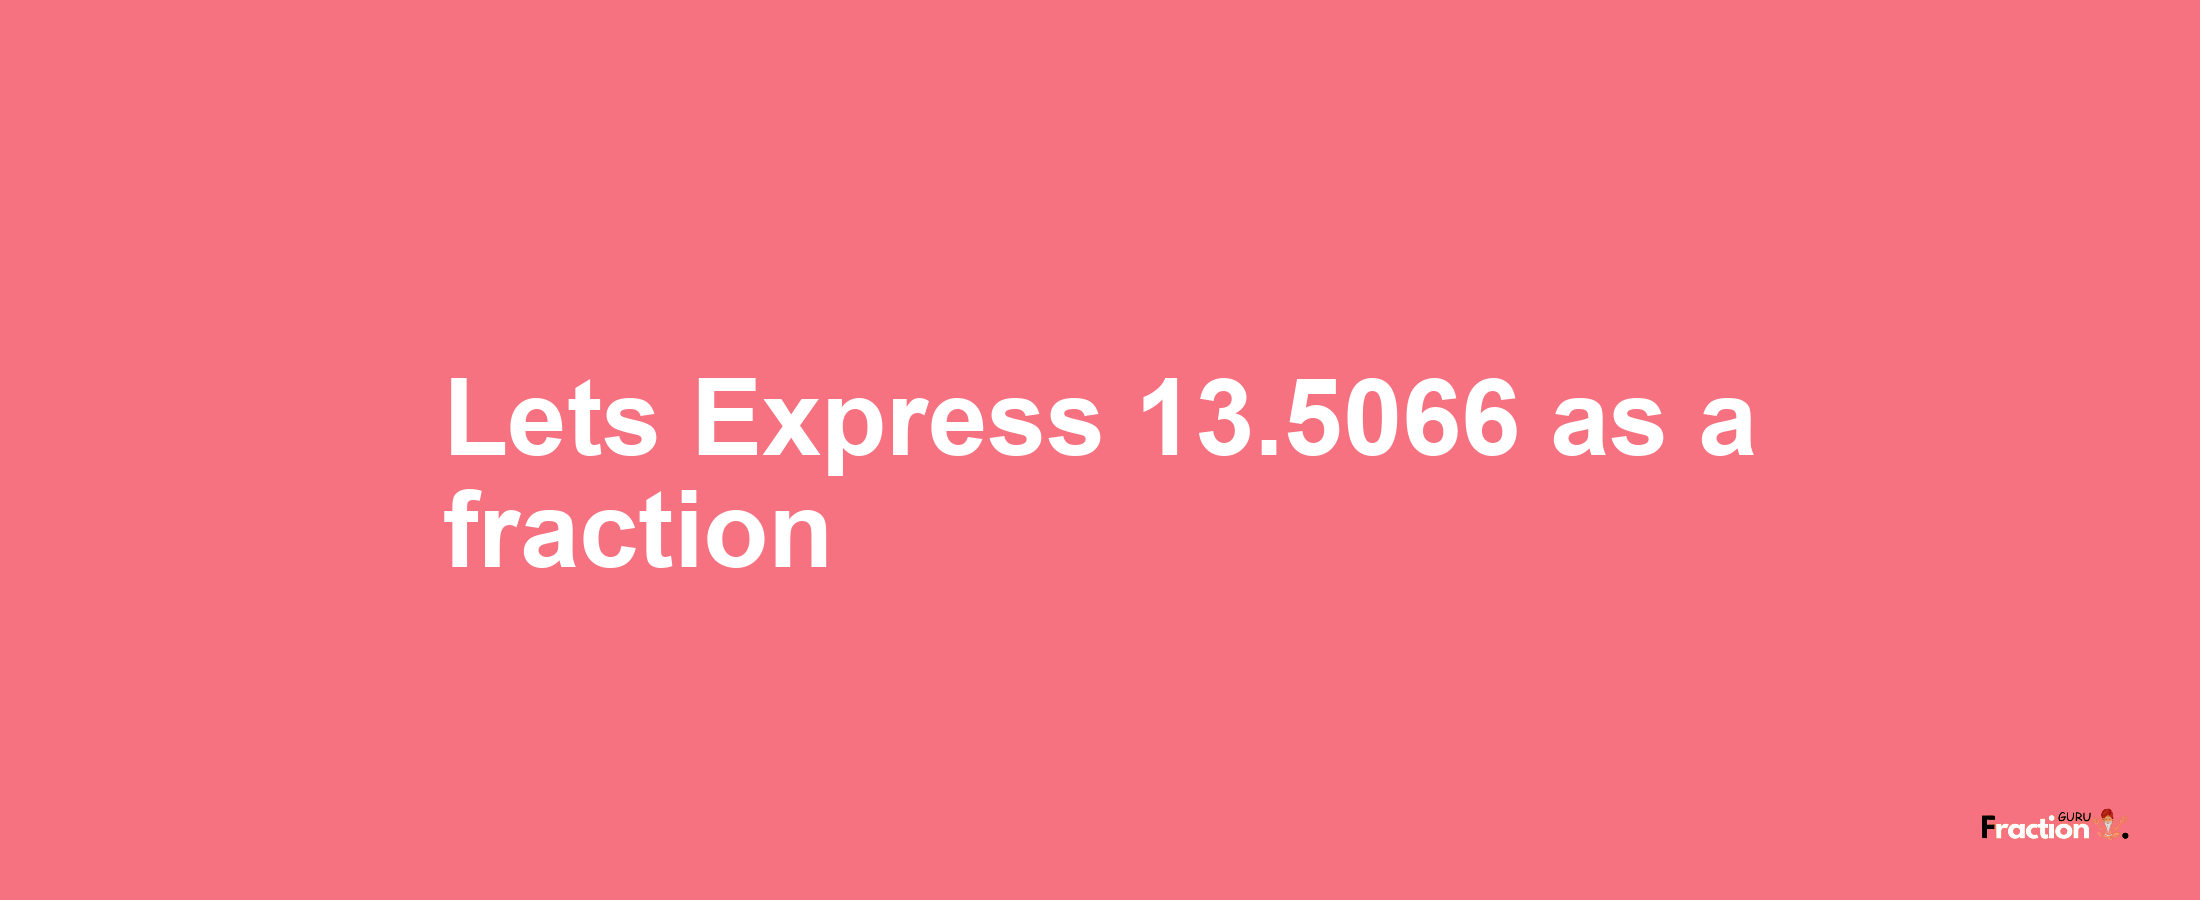 Lets Express 13.5066 as afraction